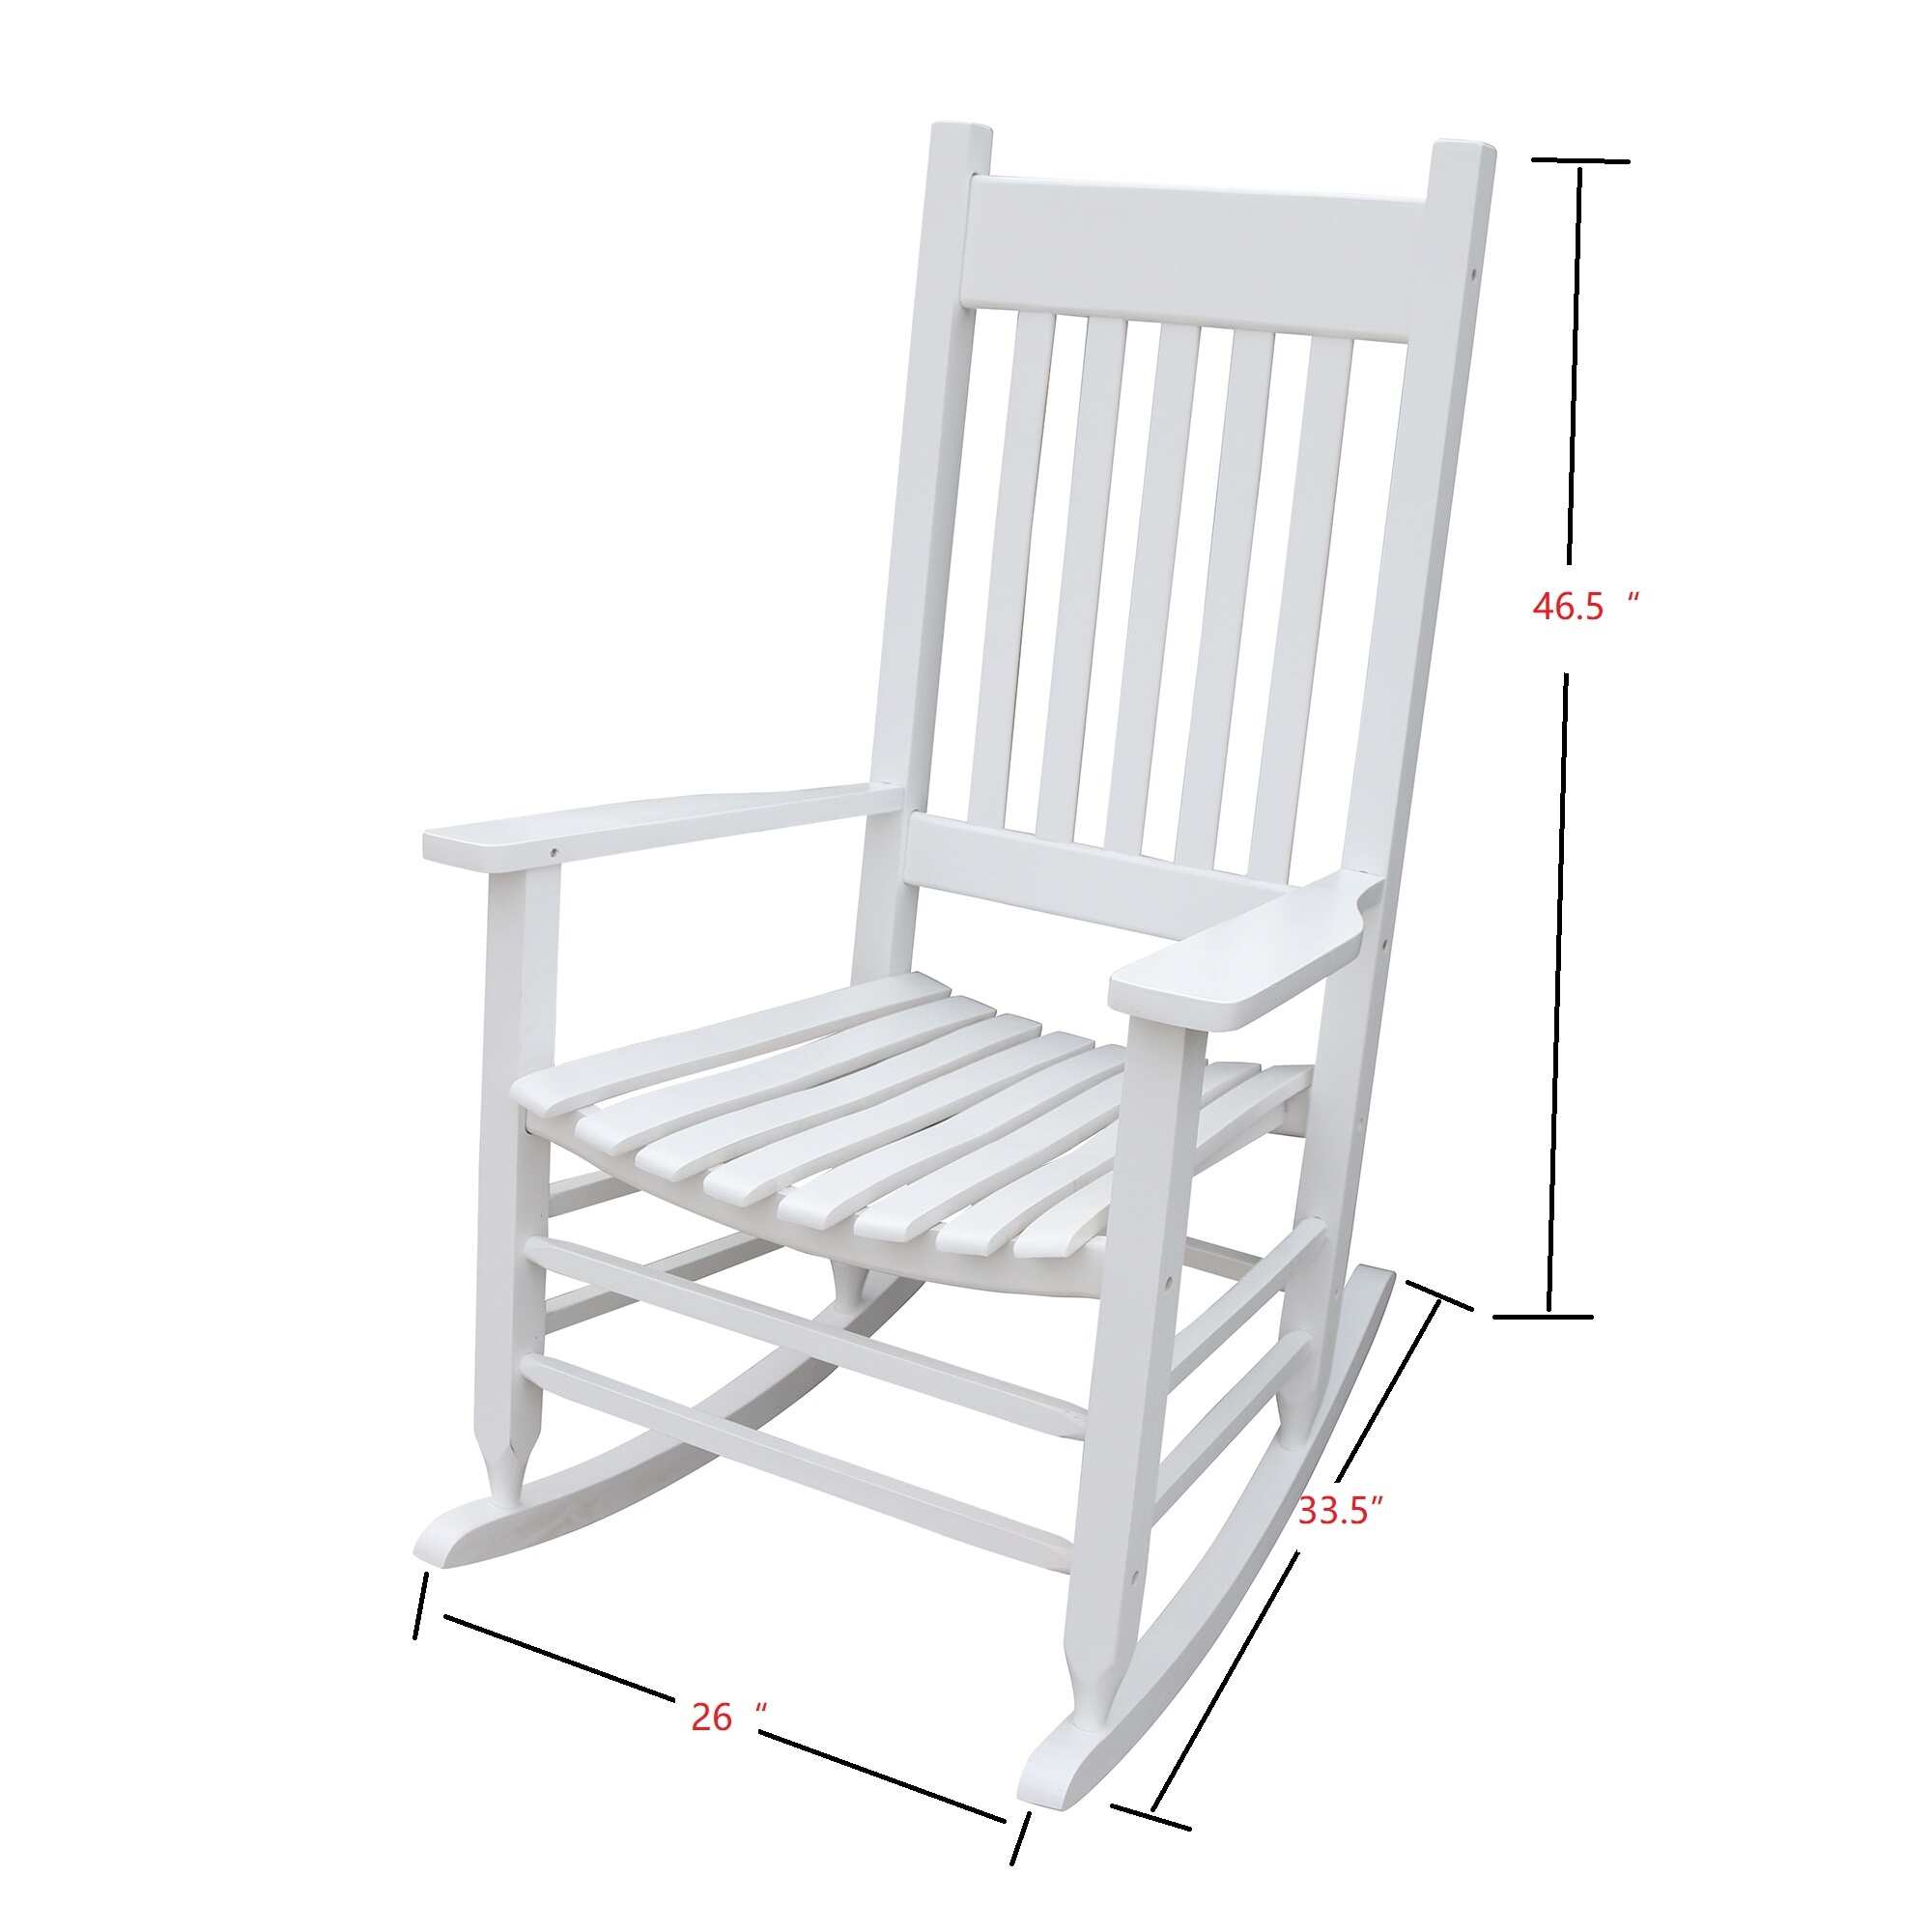 ADULT ROCKING CHAIR，Can Be Used On The Balcony, Porch